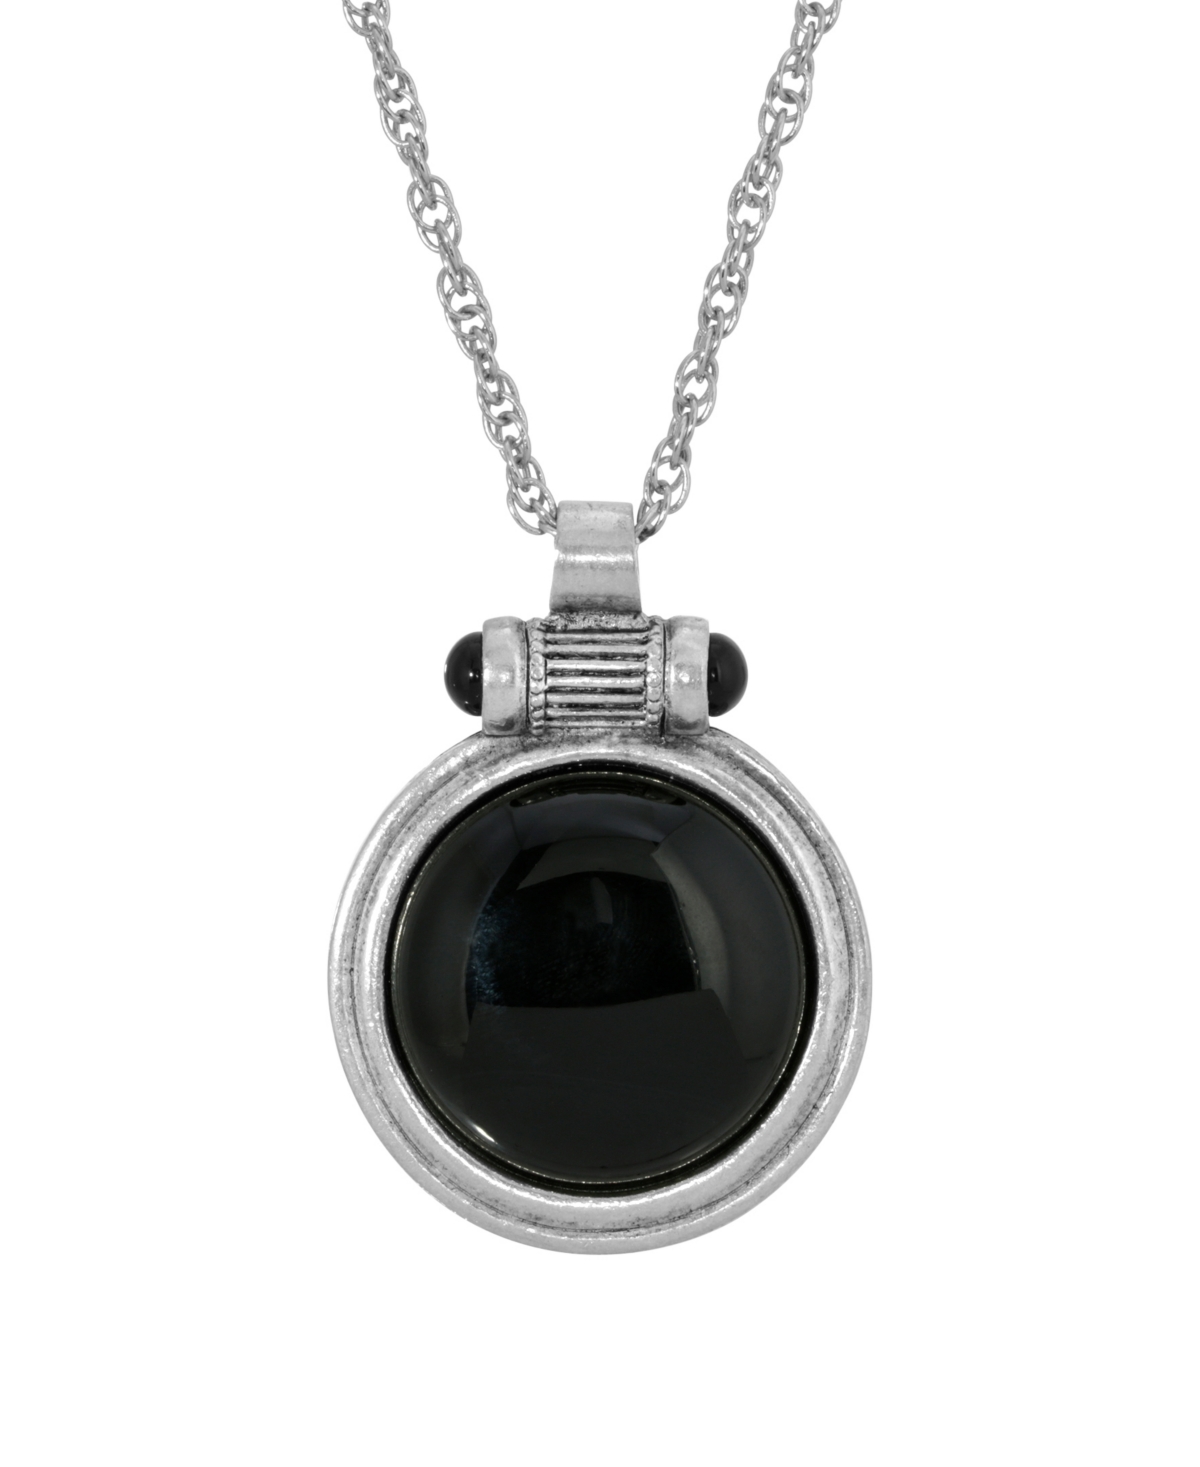 2028 Silver-tone Onyx Round Pendant Necklace In Black